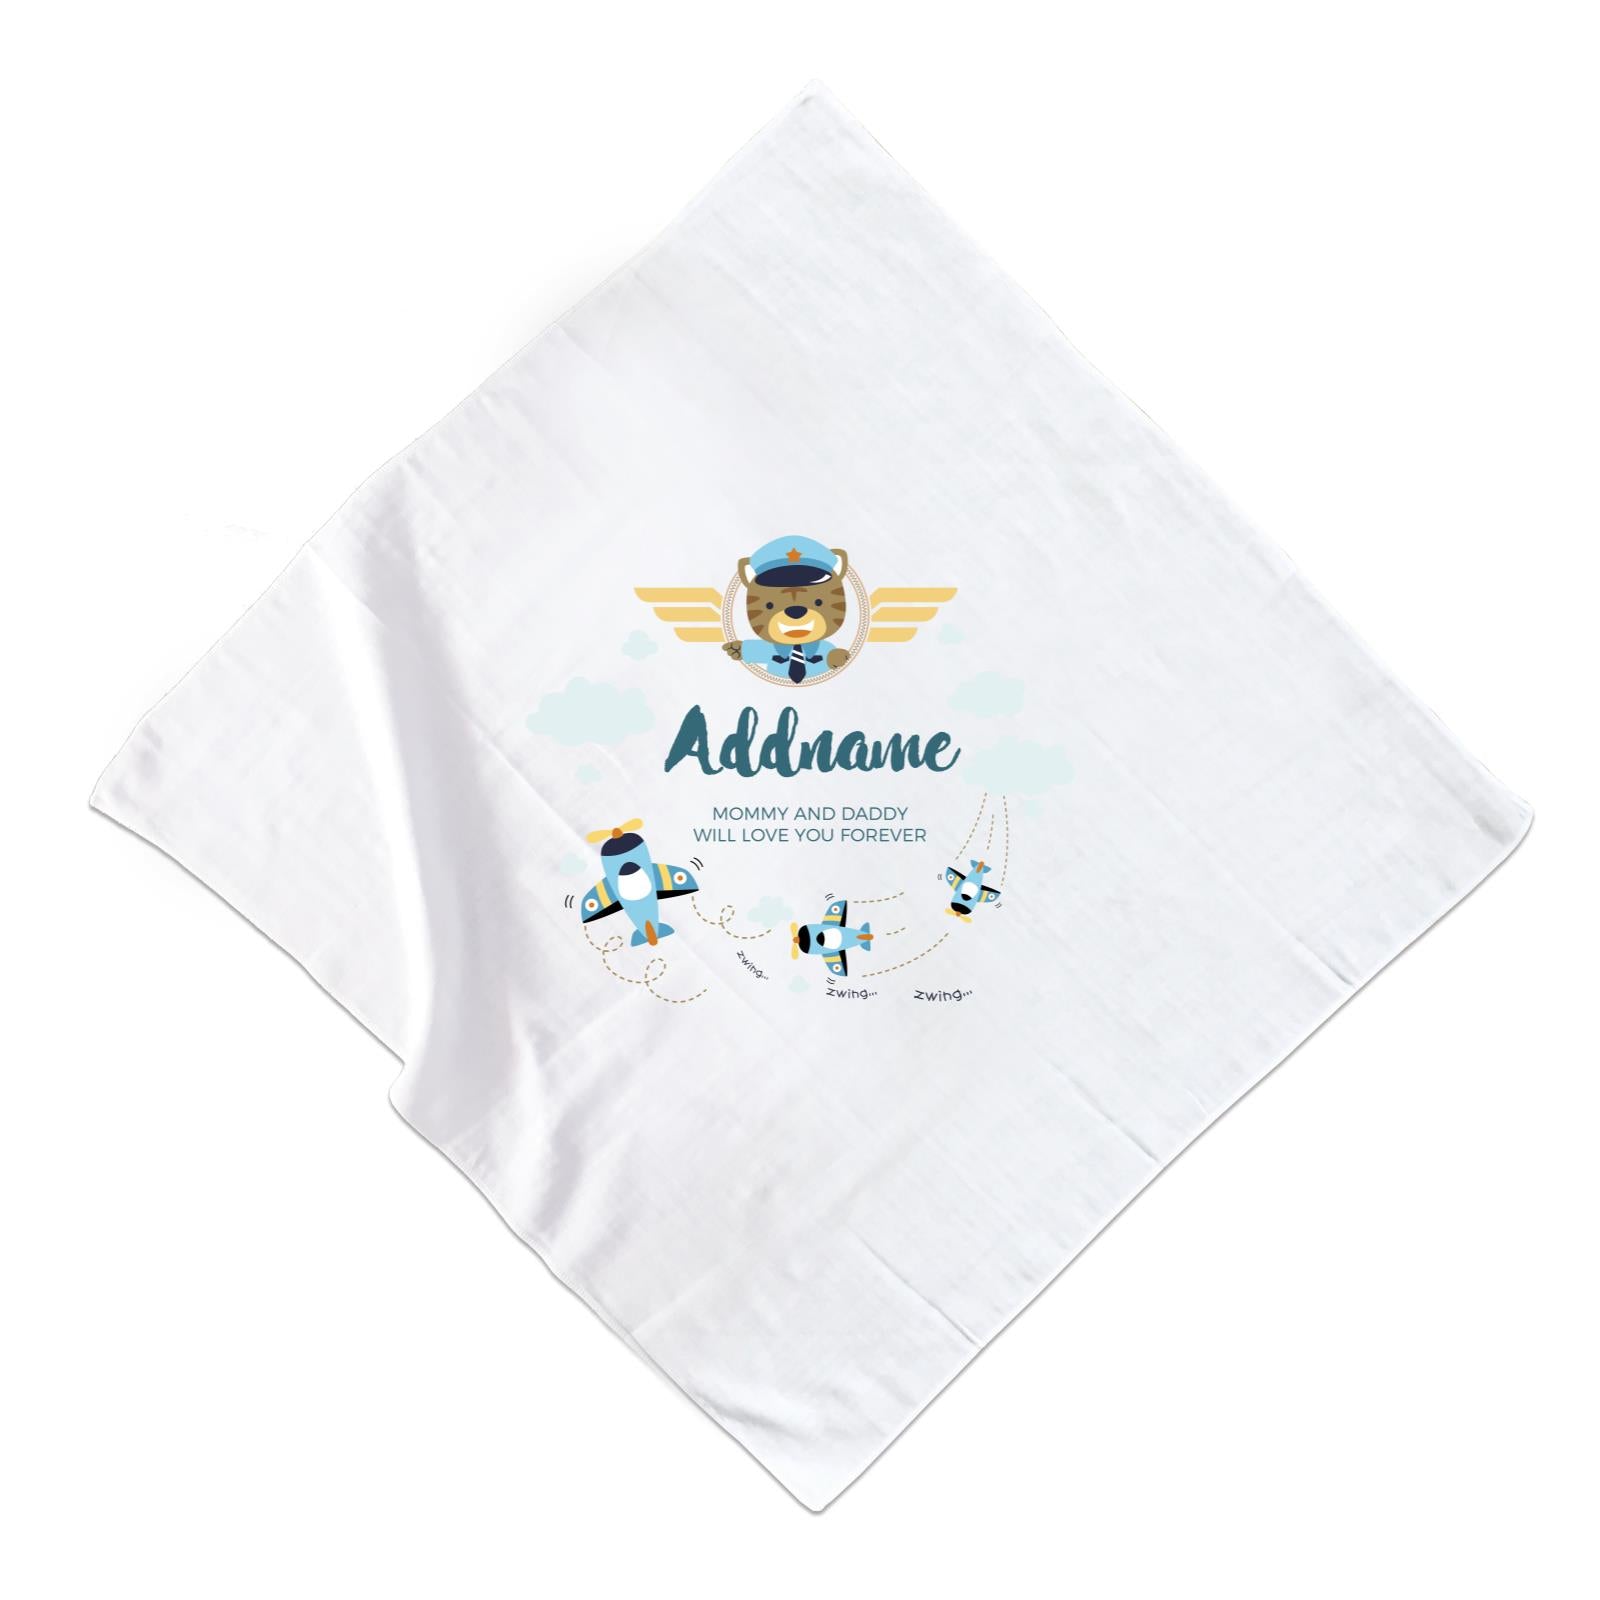 Cute Bear Pilot and Blue Planes Flying Personalizable with Name and Text Muslin Square